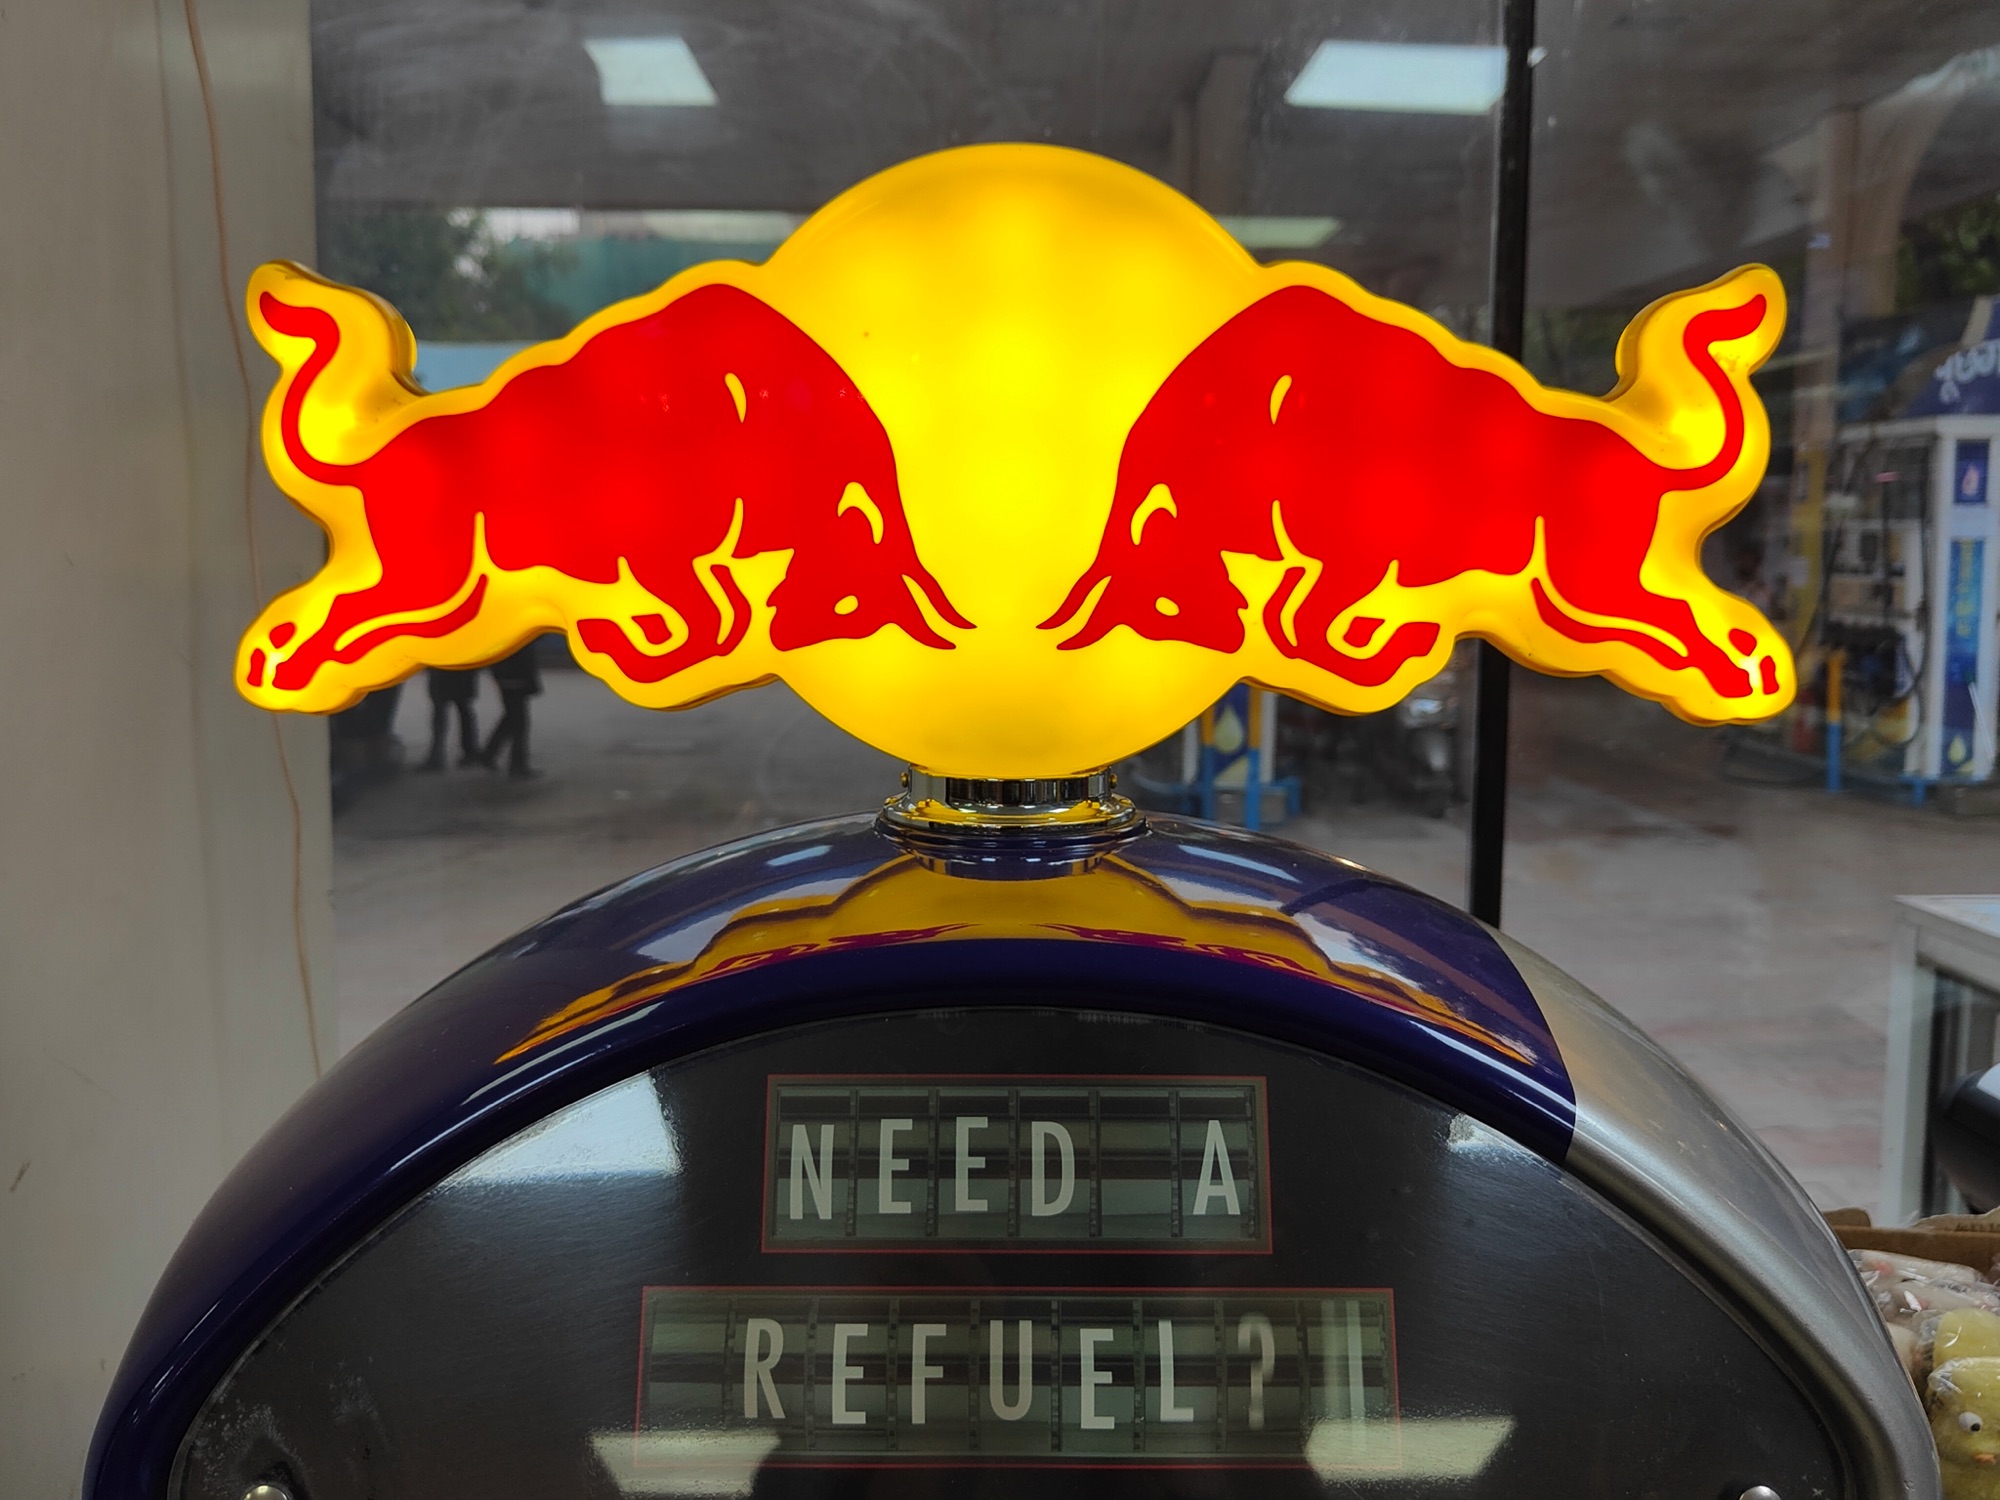 OnePlus 9RT primary camera dynamic range showing Red Bull sign.